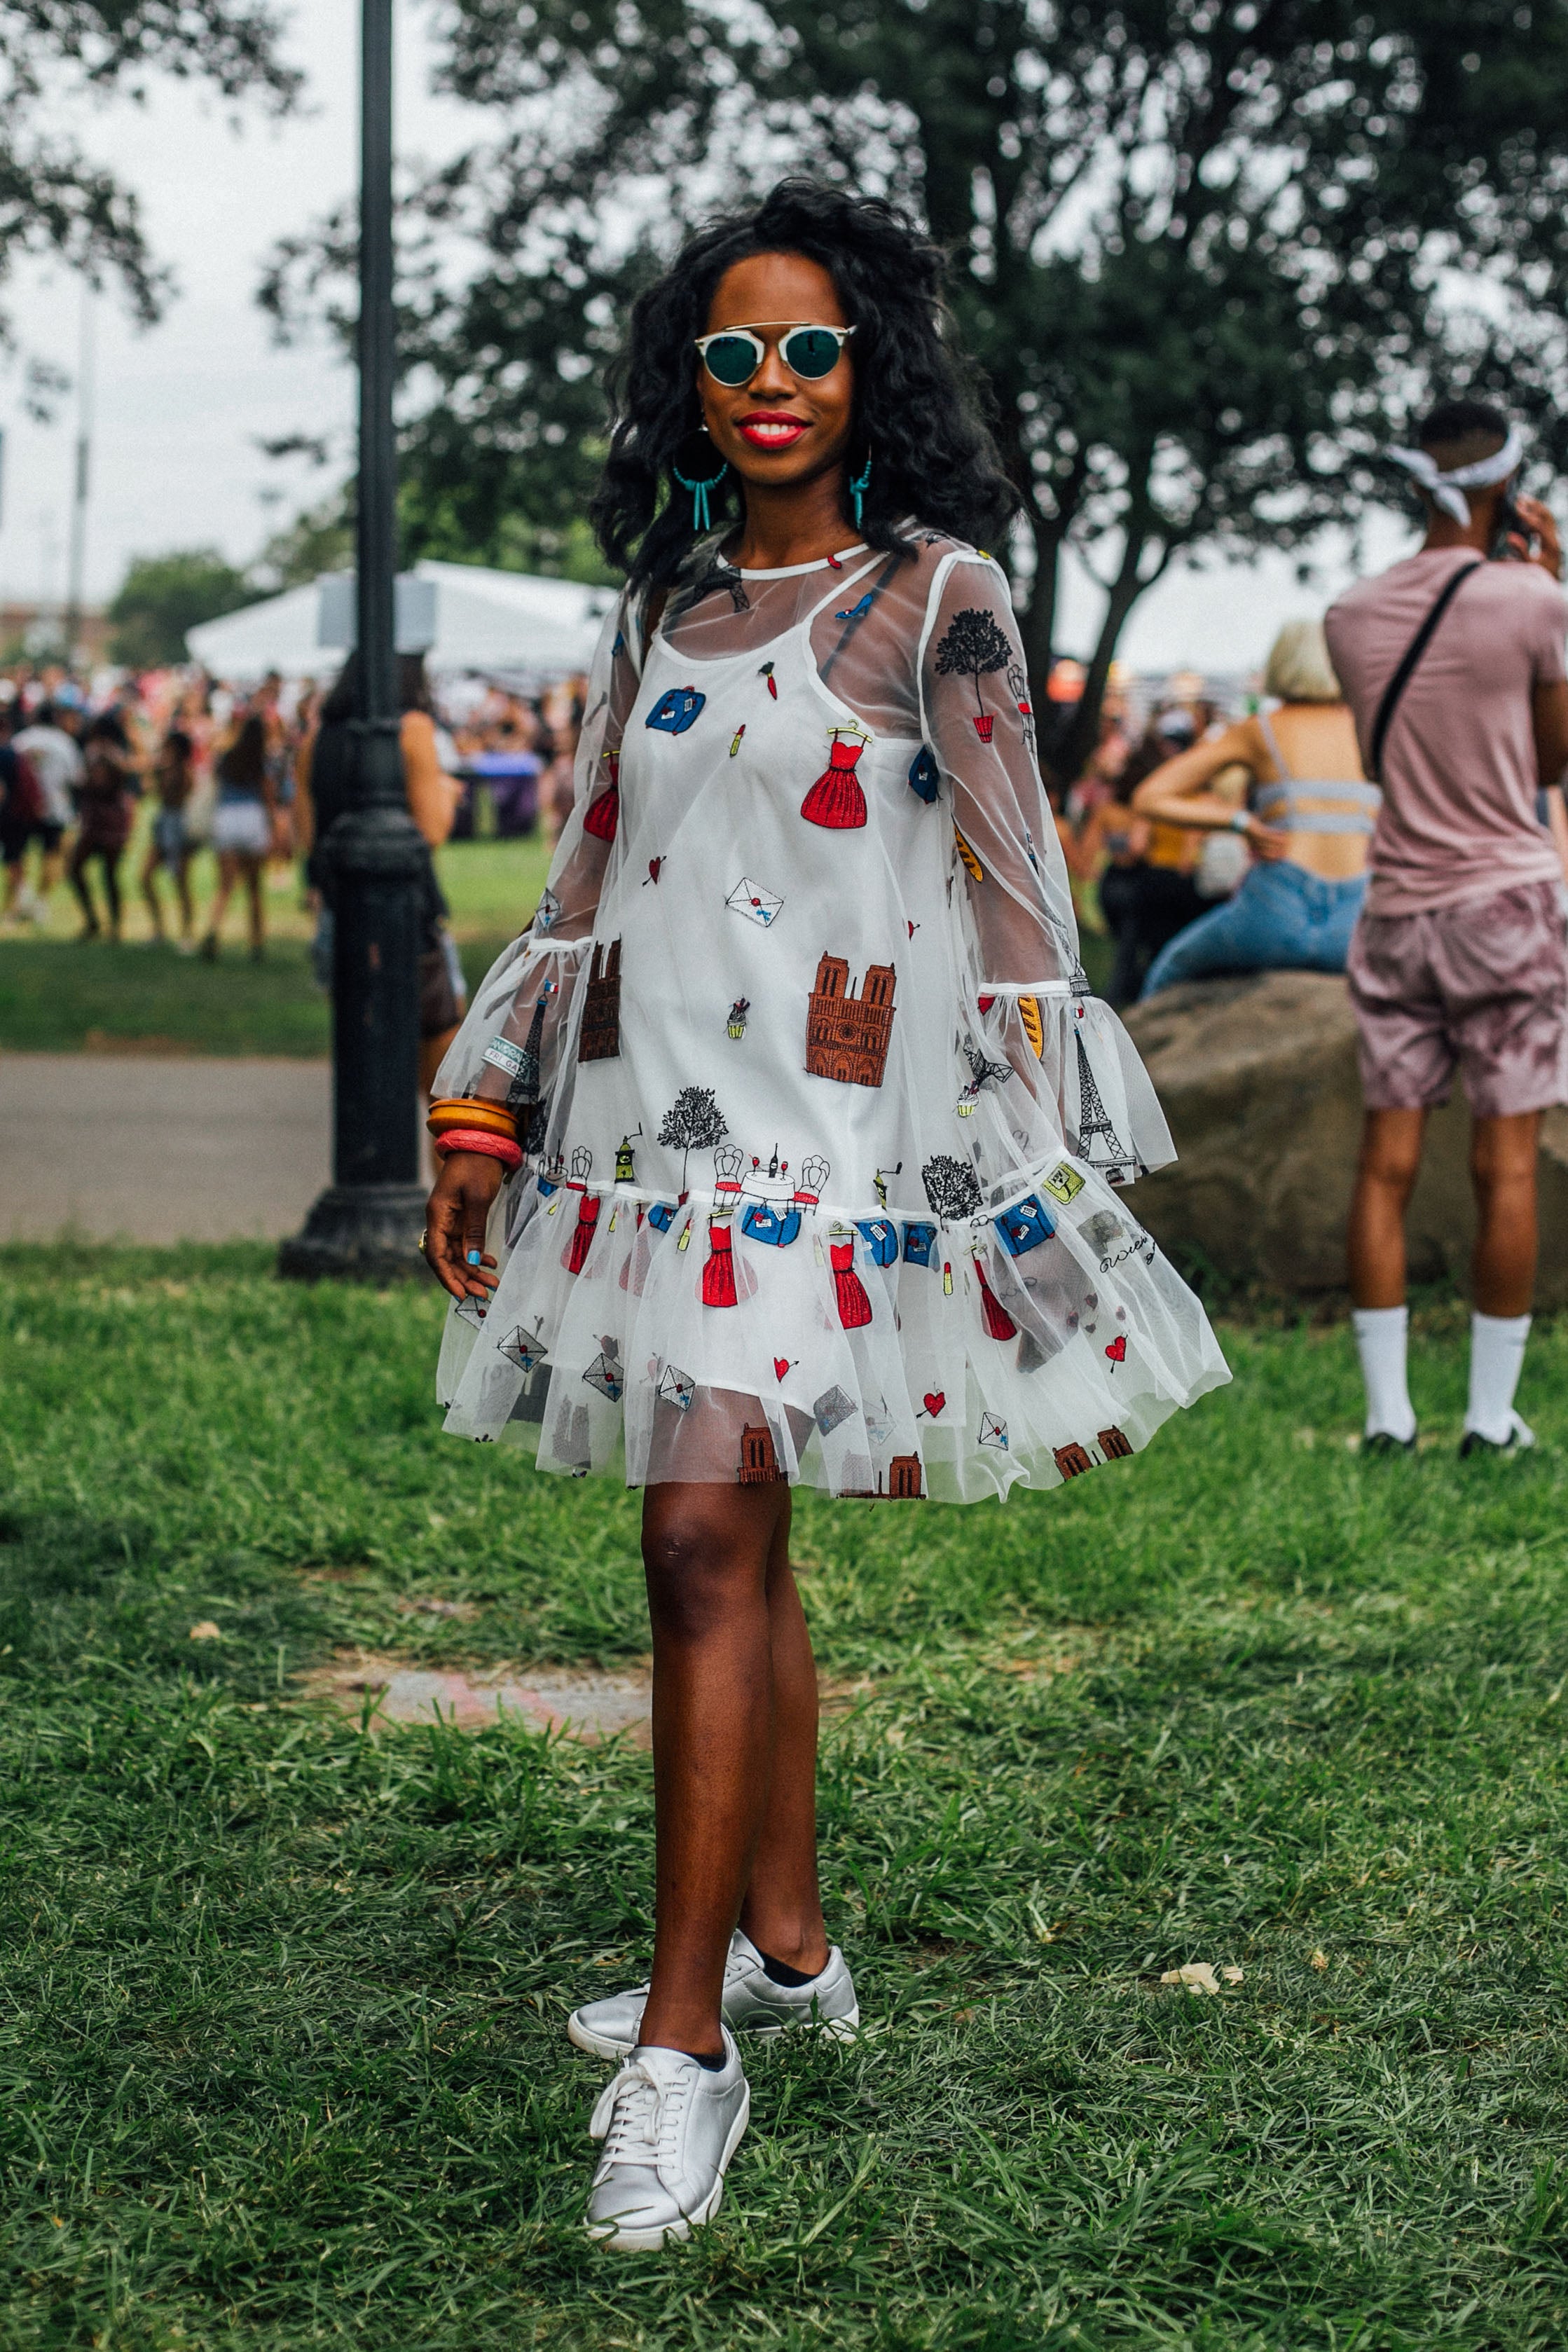 These Street Style Moments From the Panorama Music Fest are Next Level
